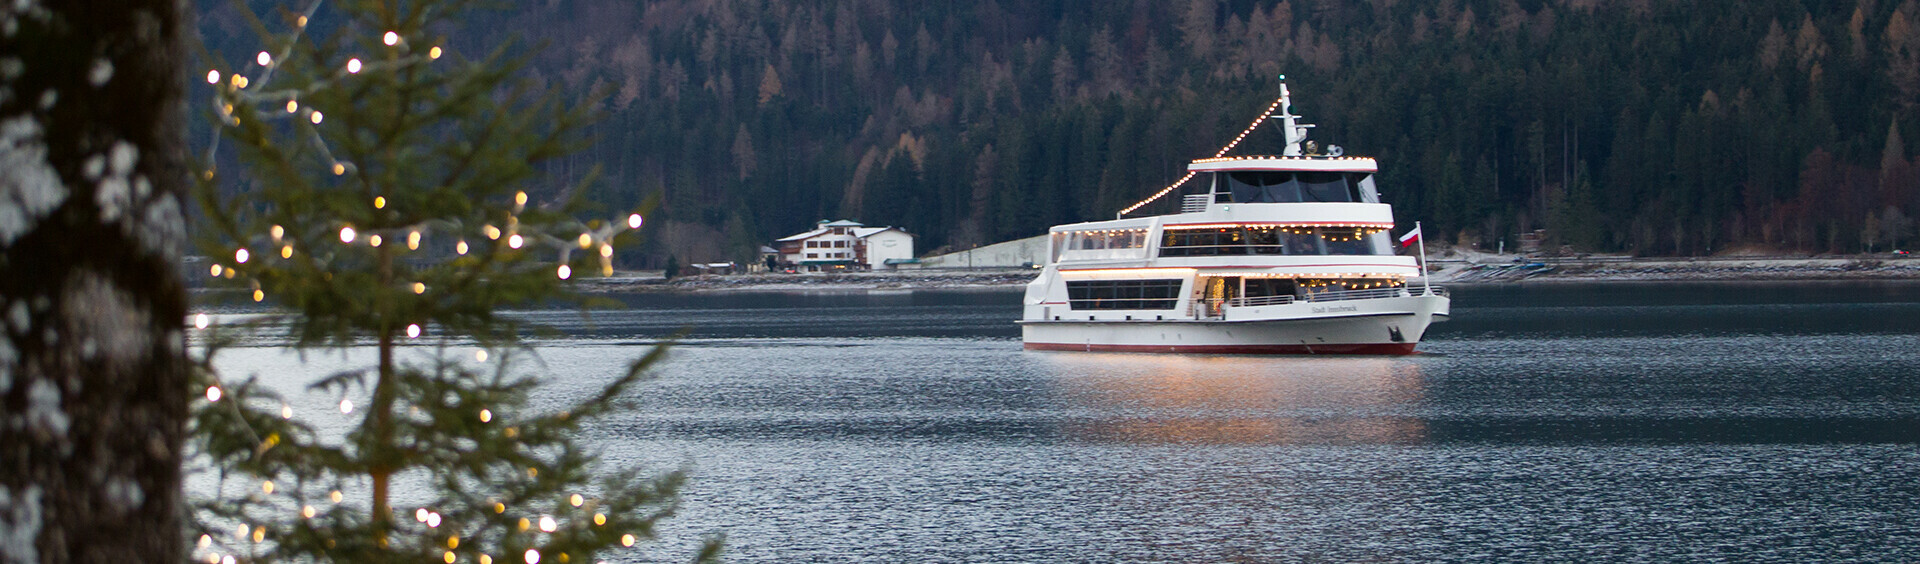 Exploring Lake Achensee in winter from on board the festively decorated ship.